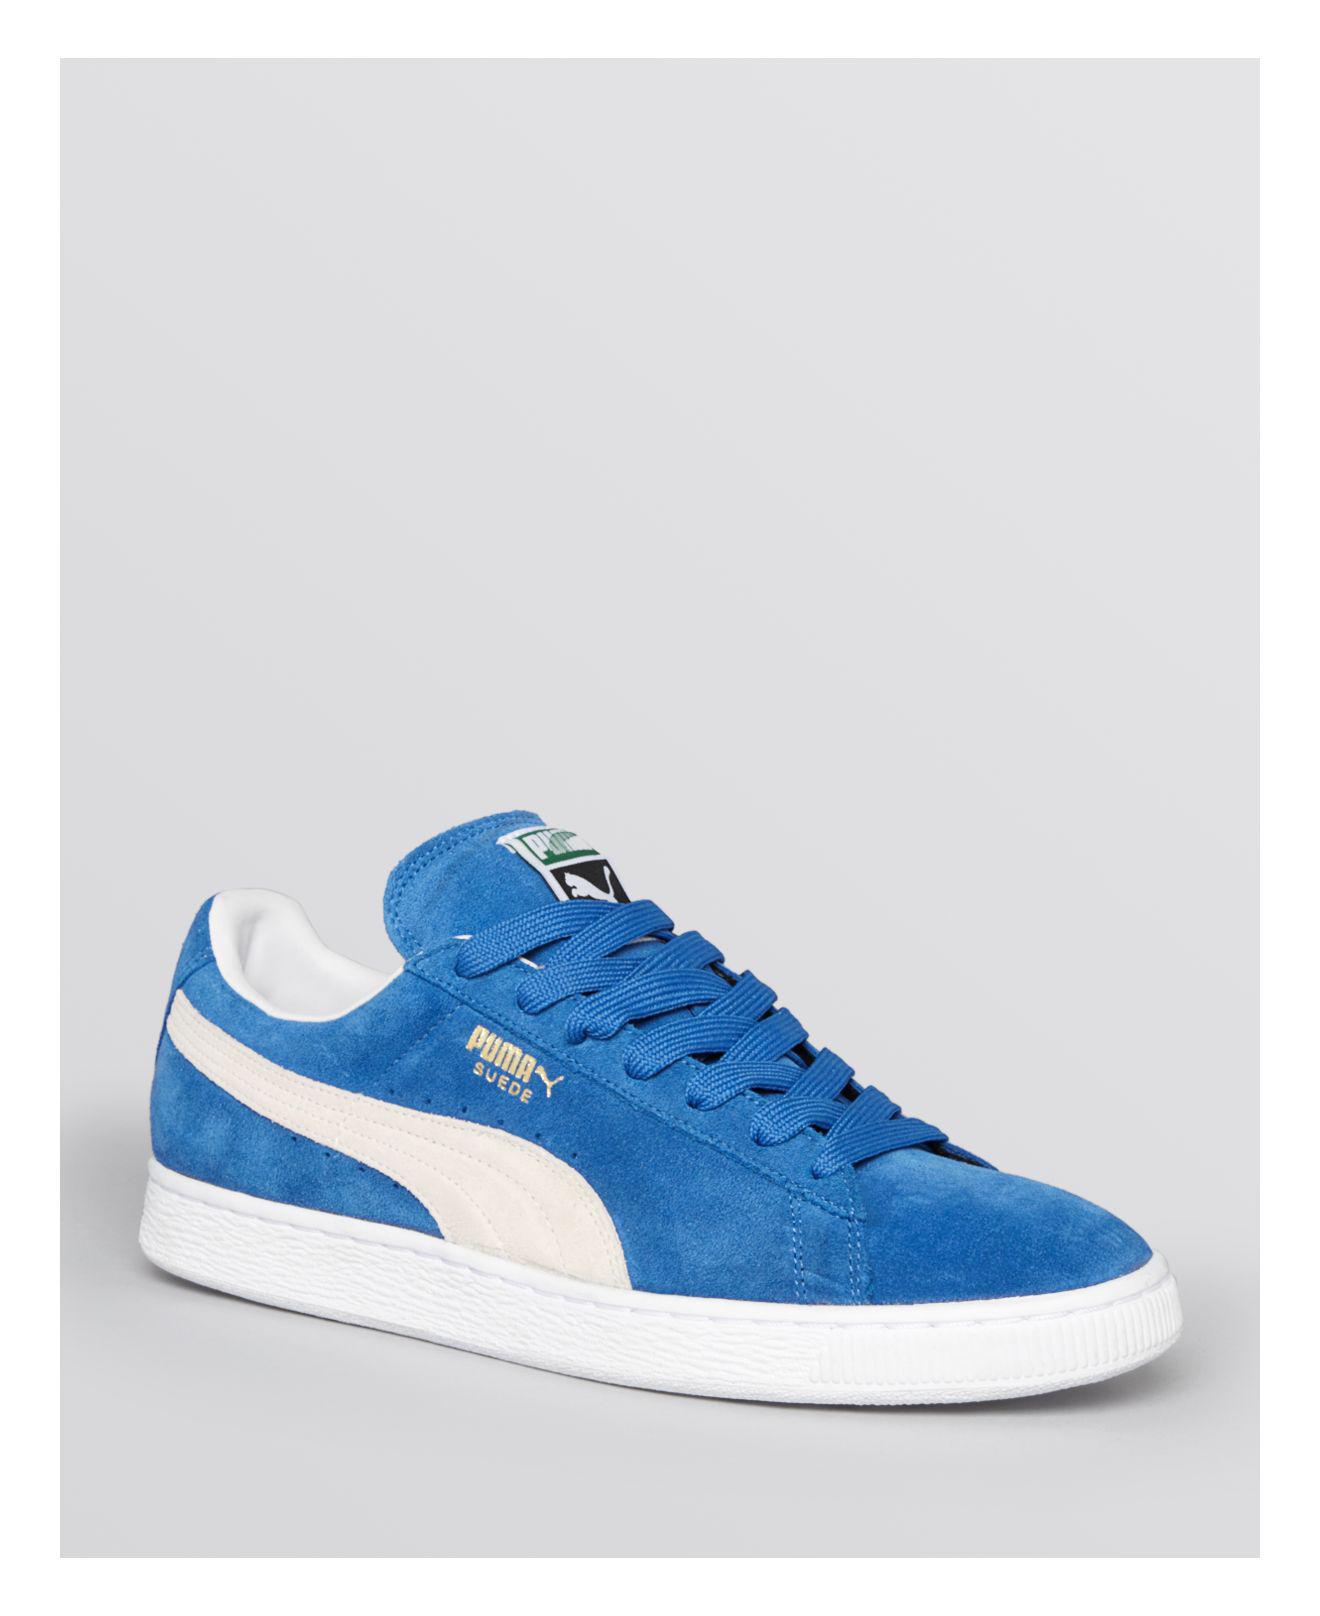 PUMA Suede Classic + Sneakers in Blue for Men - Lyst